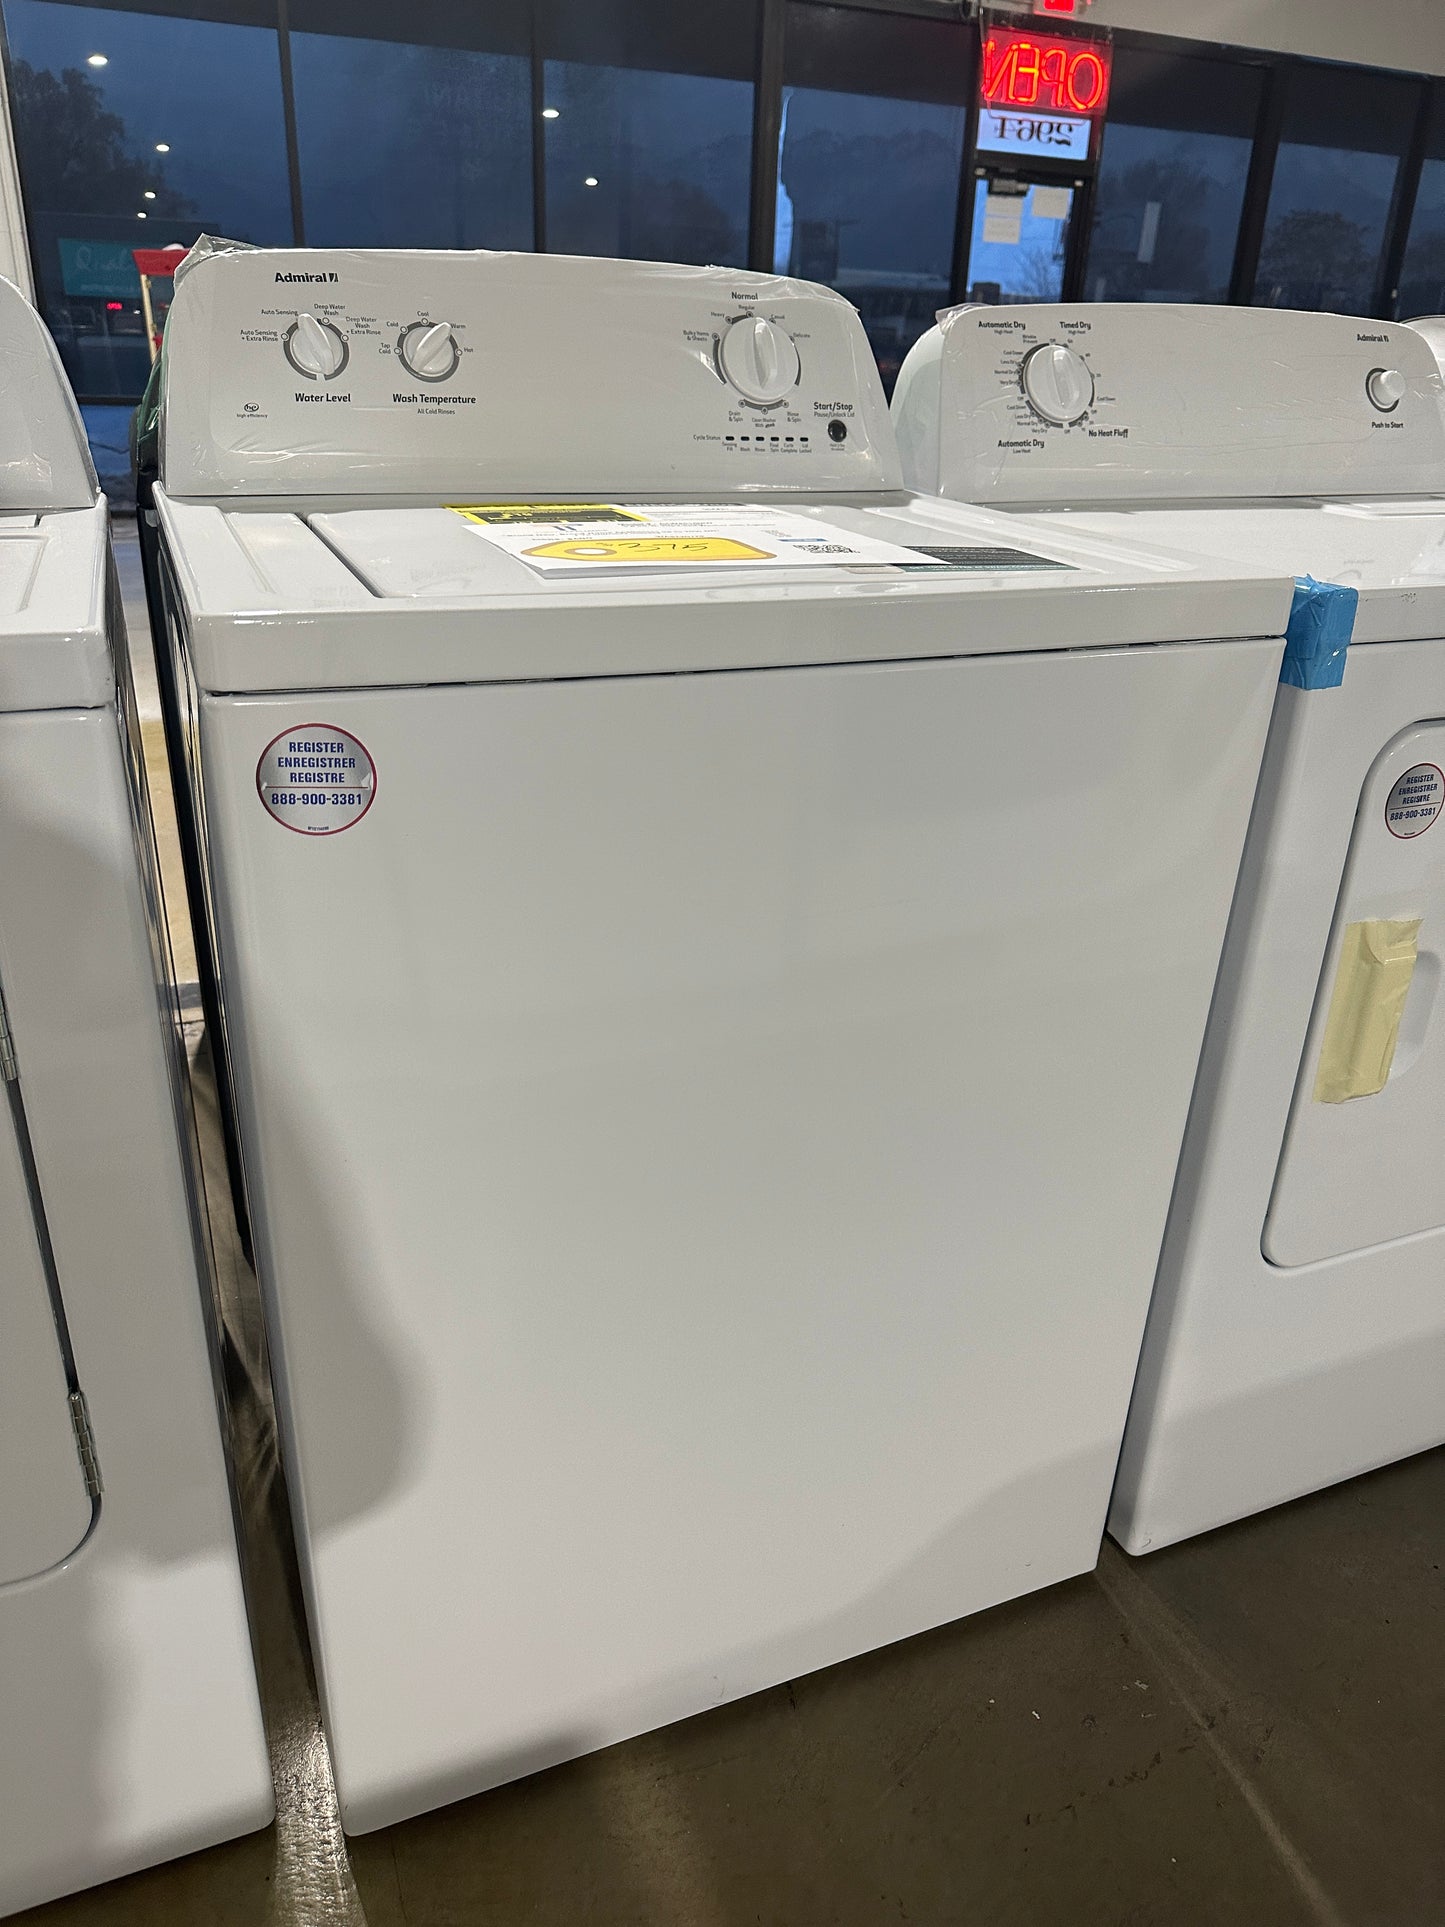 GORGEOUS BRAND NEW TOP LOAD WASHER WITH AGITATOR MODEL: ATW4516MW  WAS12072S